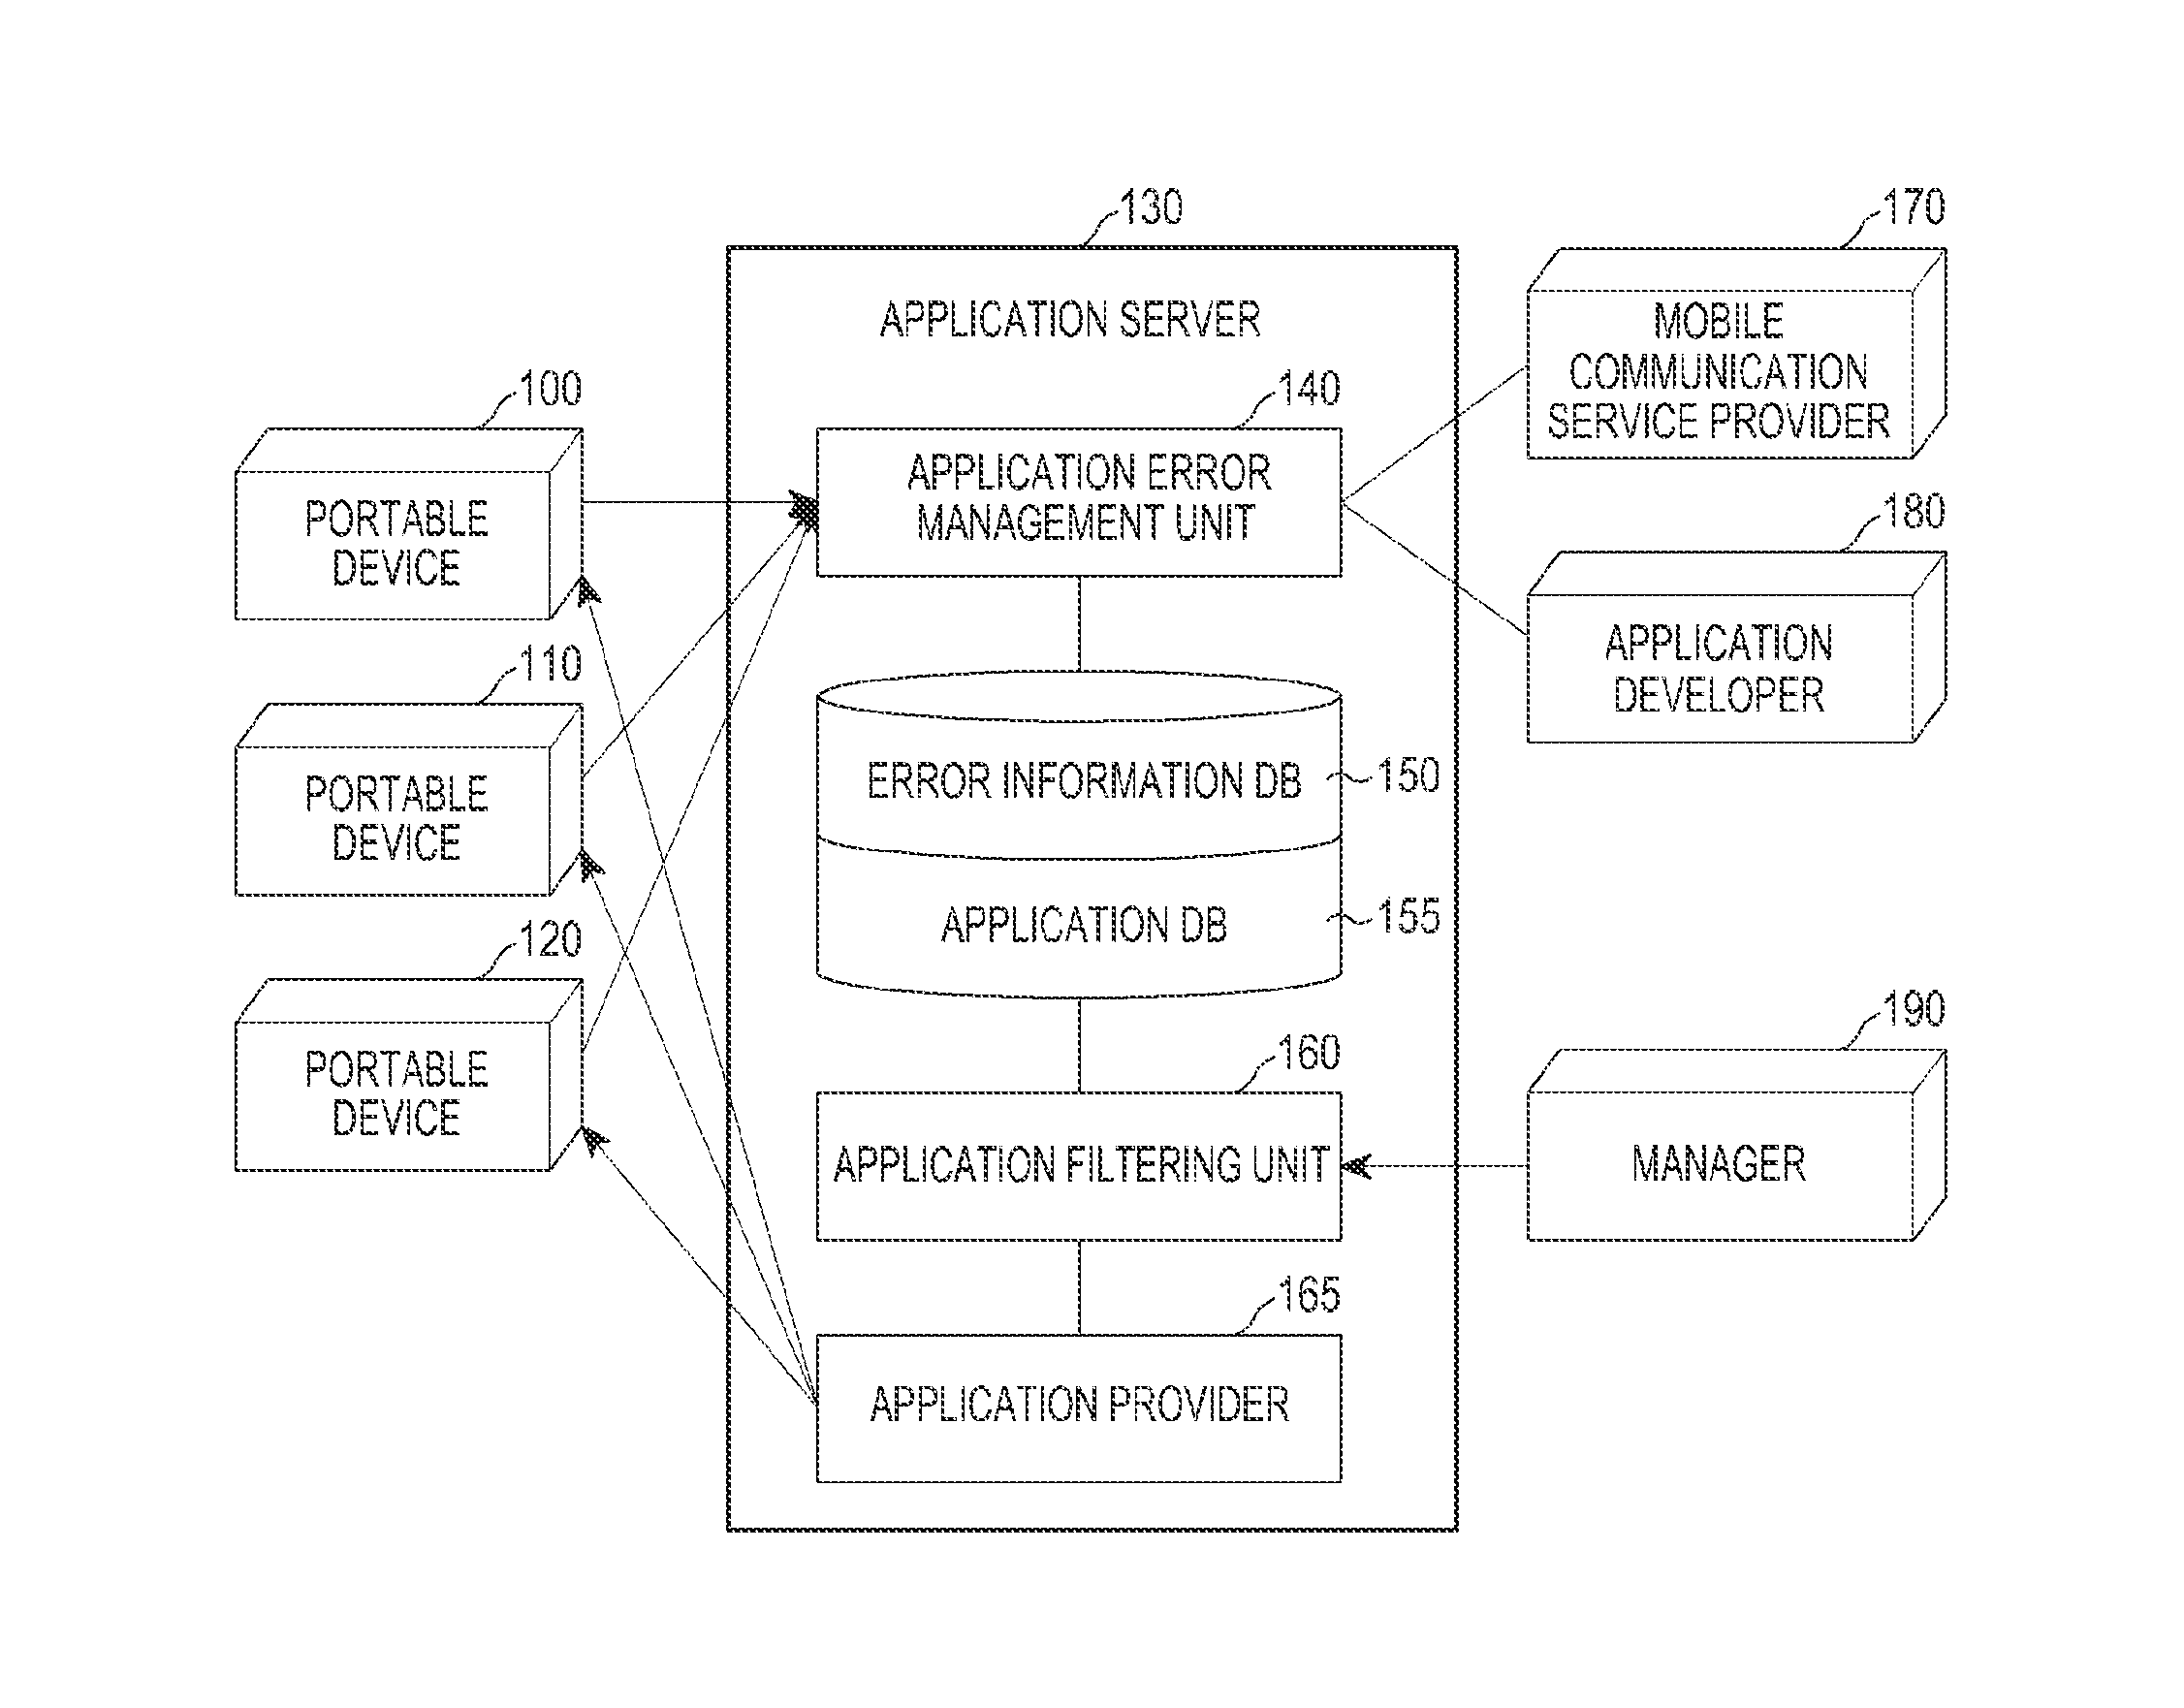 Apparatus and method for managing application error